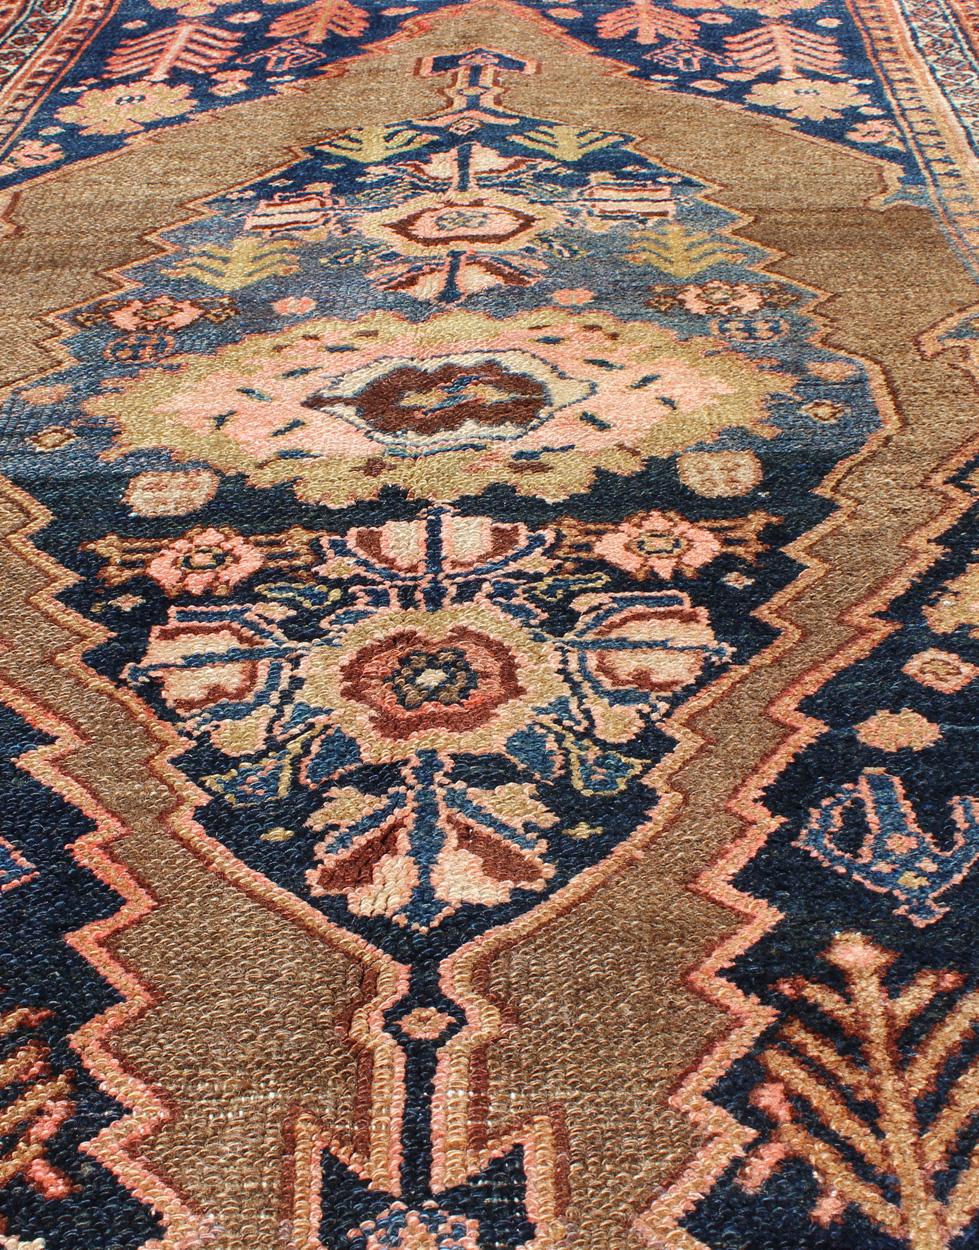 Tribal Medallion Design Antique Persian Serab Rug in Camel and Shades of Blue For Sale 4